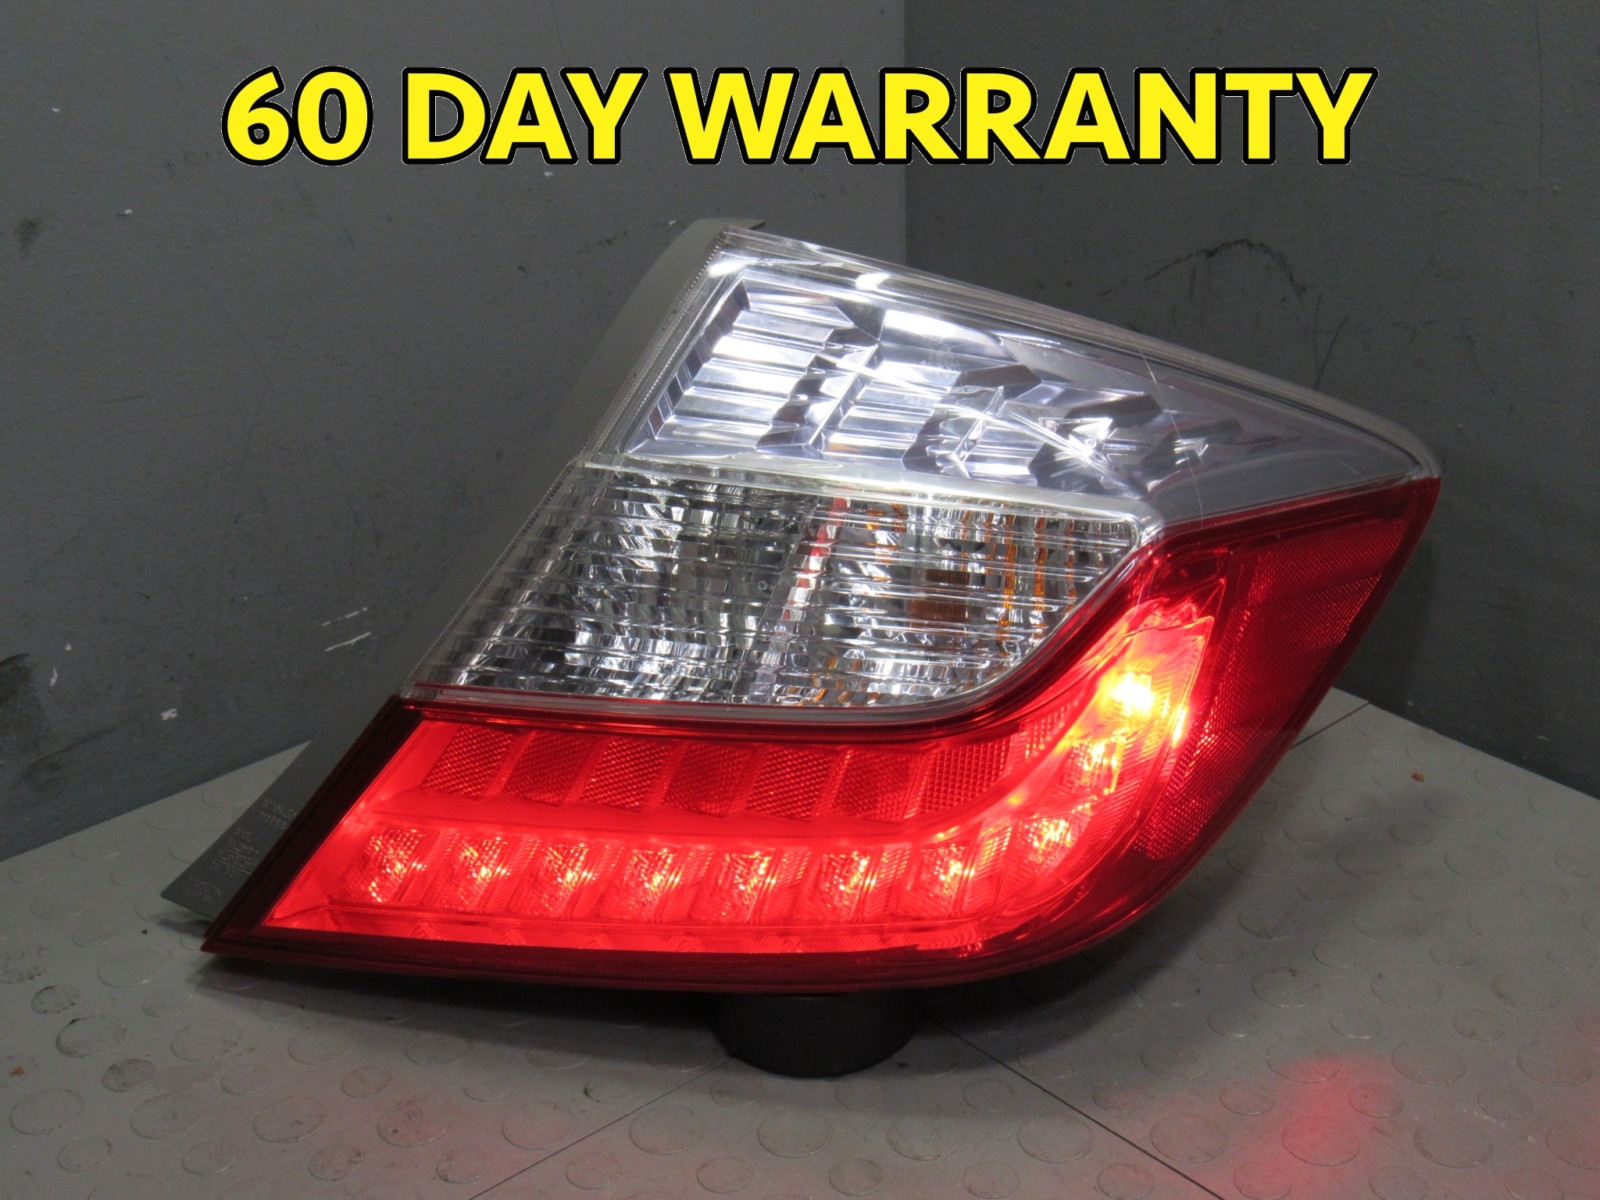 USテールライト 12ホンダシビックテールライト ランプペア（左右セット） Fits 12 HONDA CIVIC TAIL LIGHT LAMP Pair (Left and Right Set)